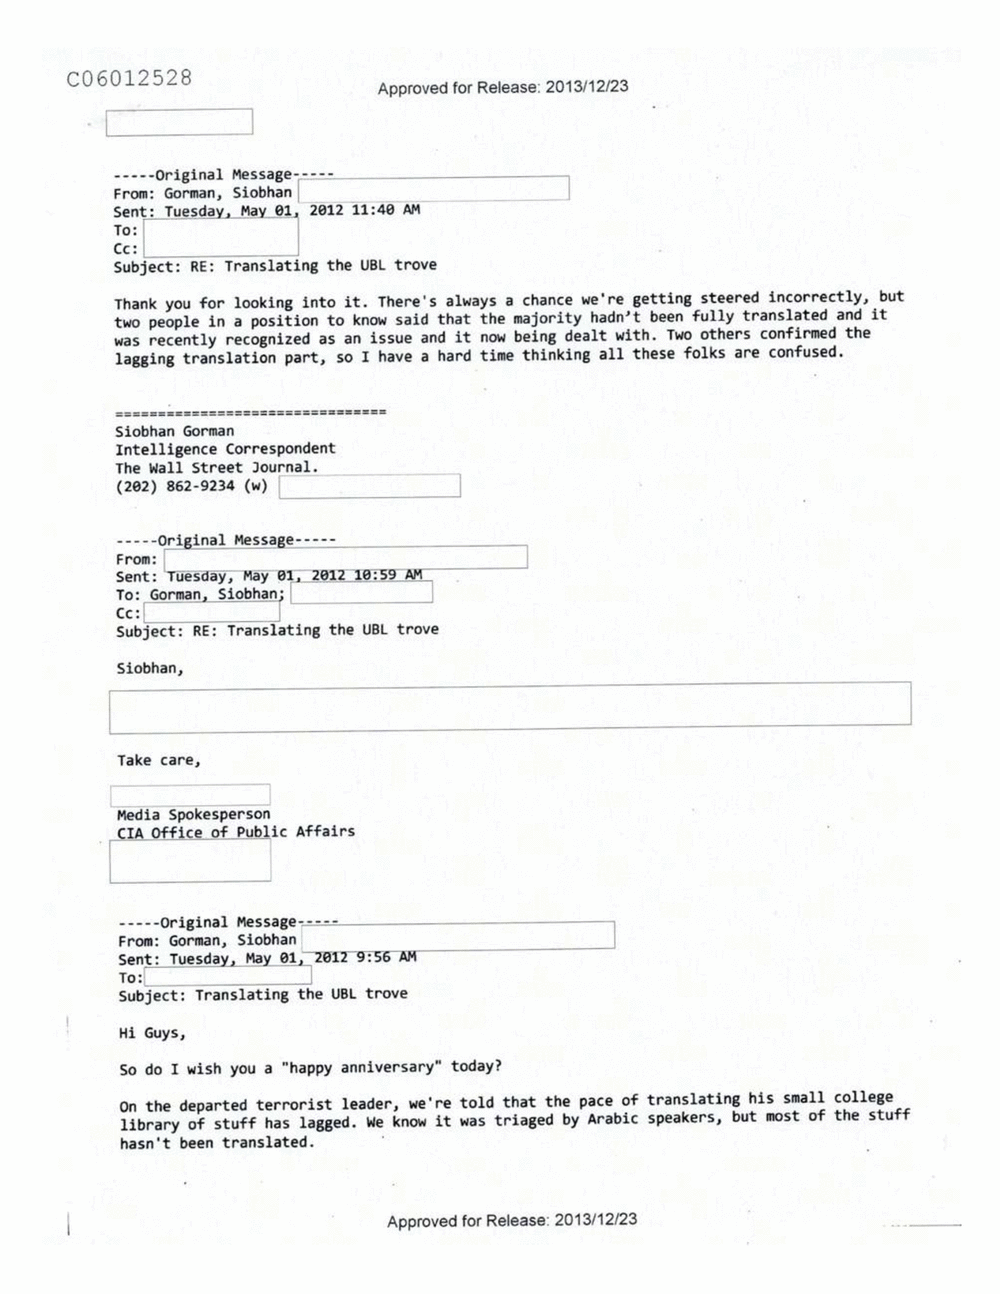 Page 55 from Email Correspondence Between Reporters and CIA Flacks